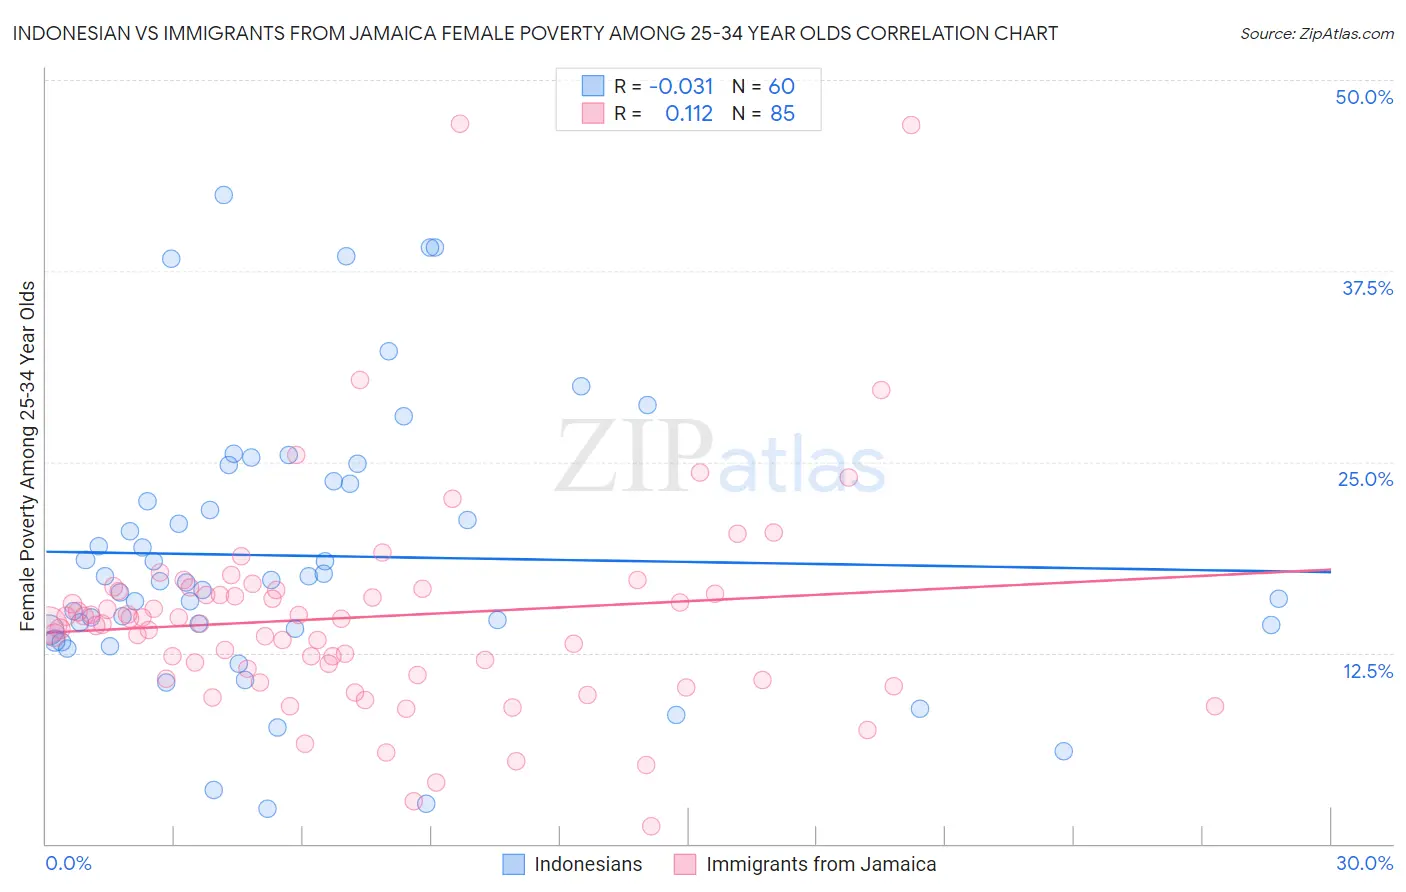 Indonesian vs Immigrants from Jamaica Female Poverty Among 25-34 Year Olds